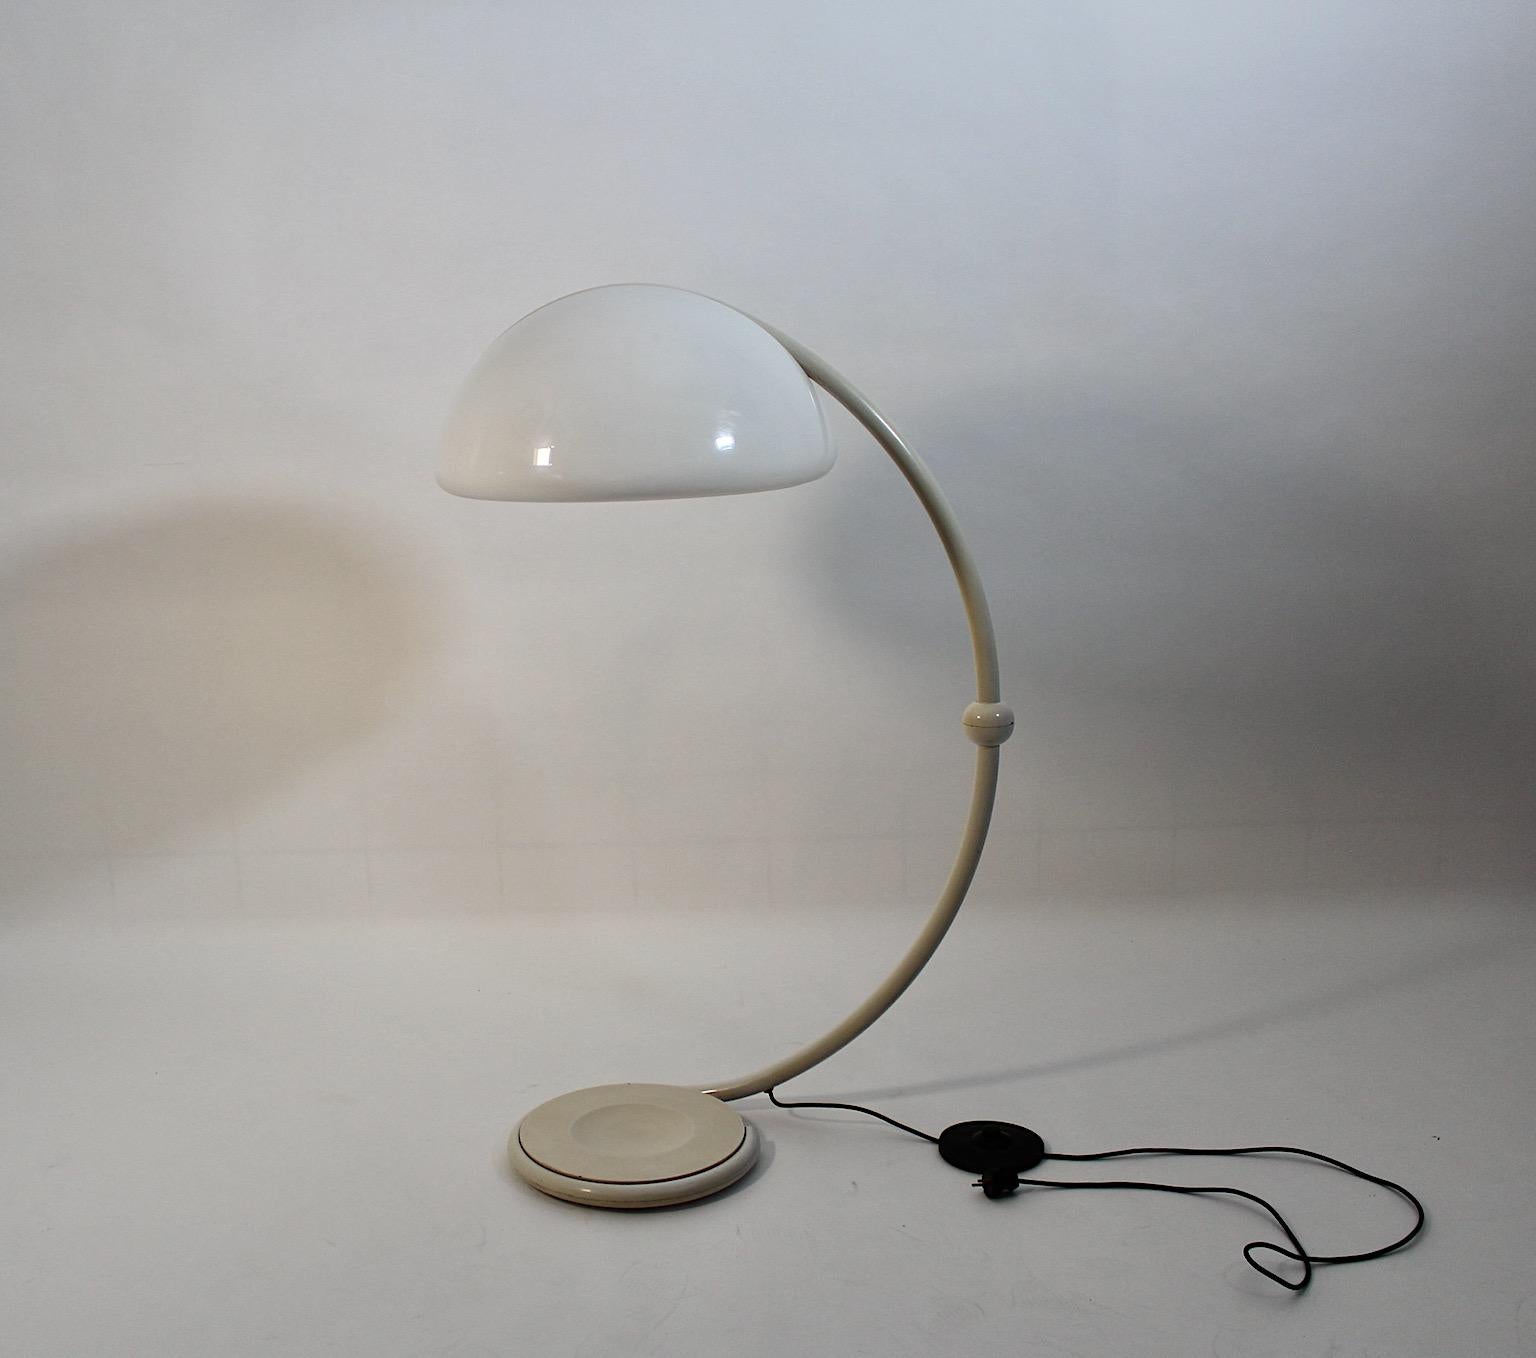 Space Age Vintage Floor Lamp White Plastic Metal Elio Martinelli 1970s Italy For Sale 3